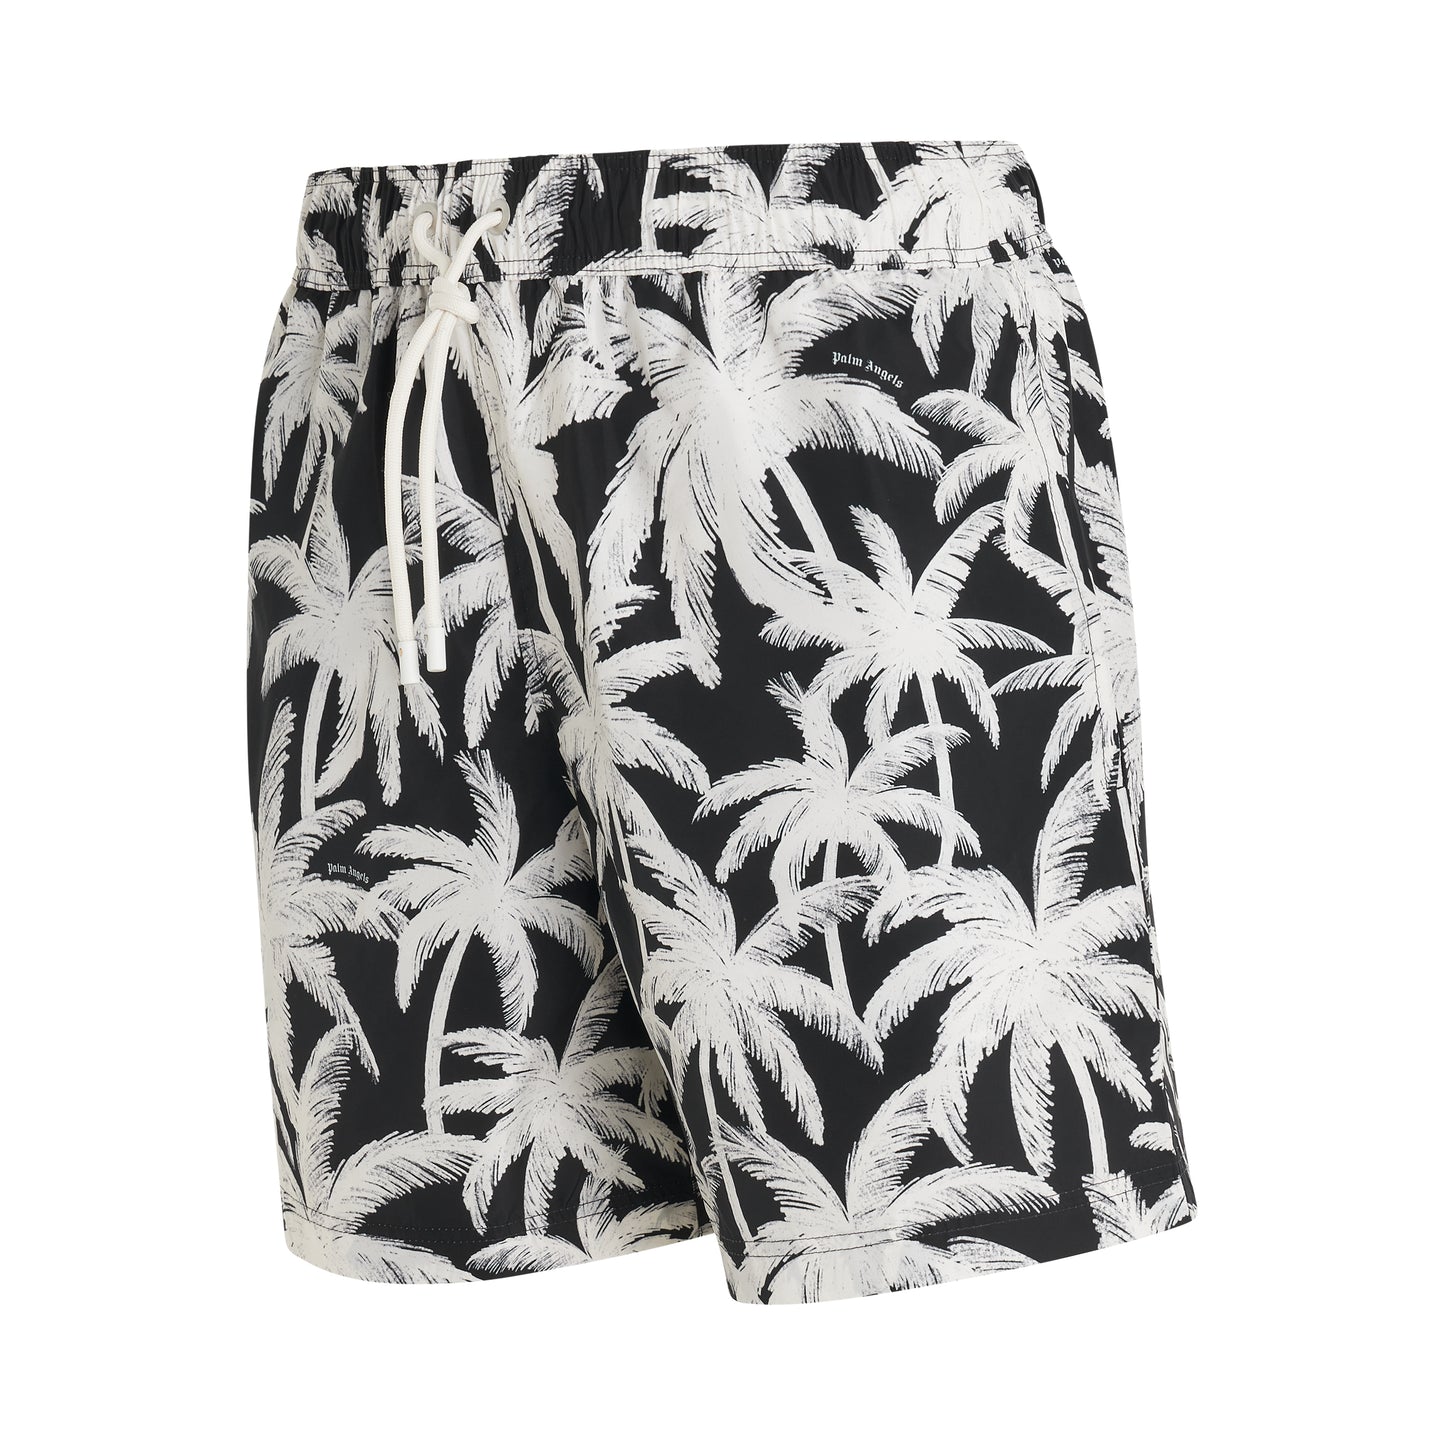 Palms All-over Swim shorts in Black/Off White